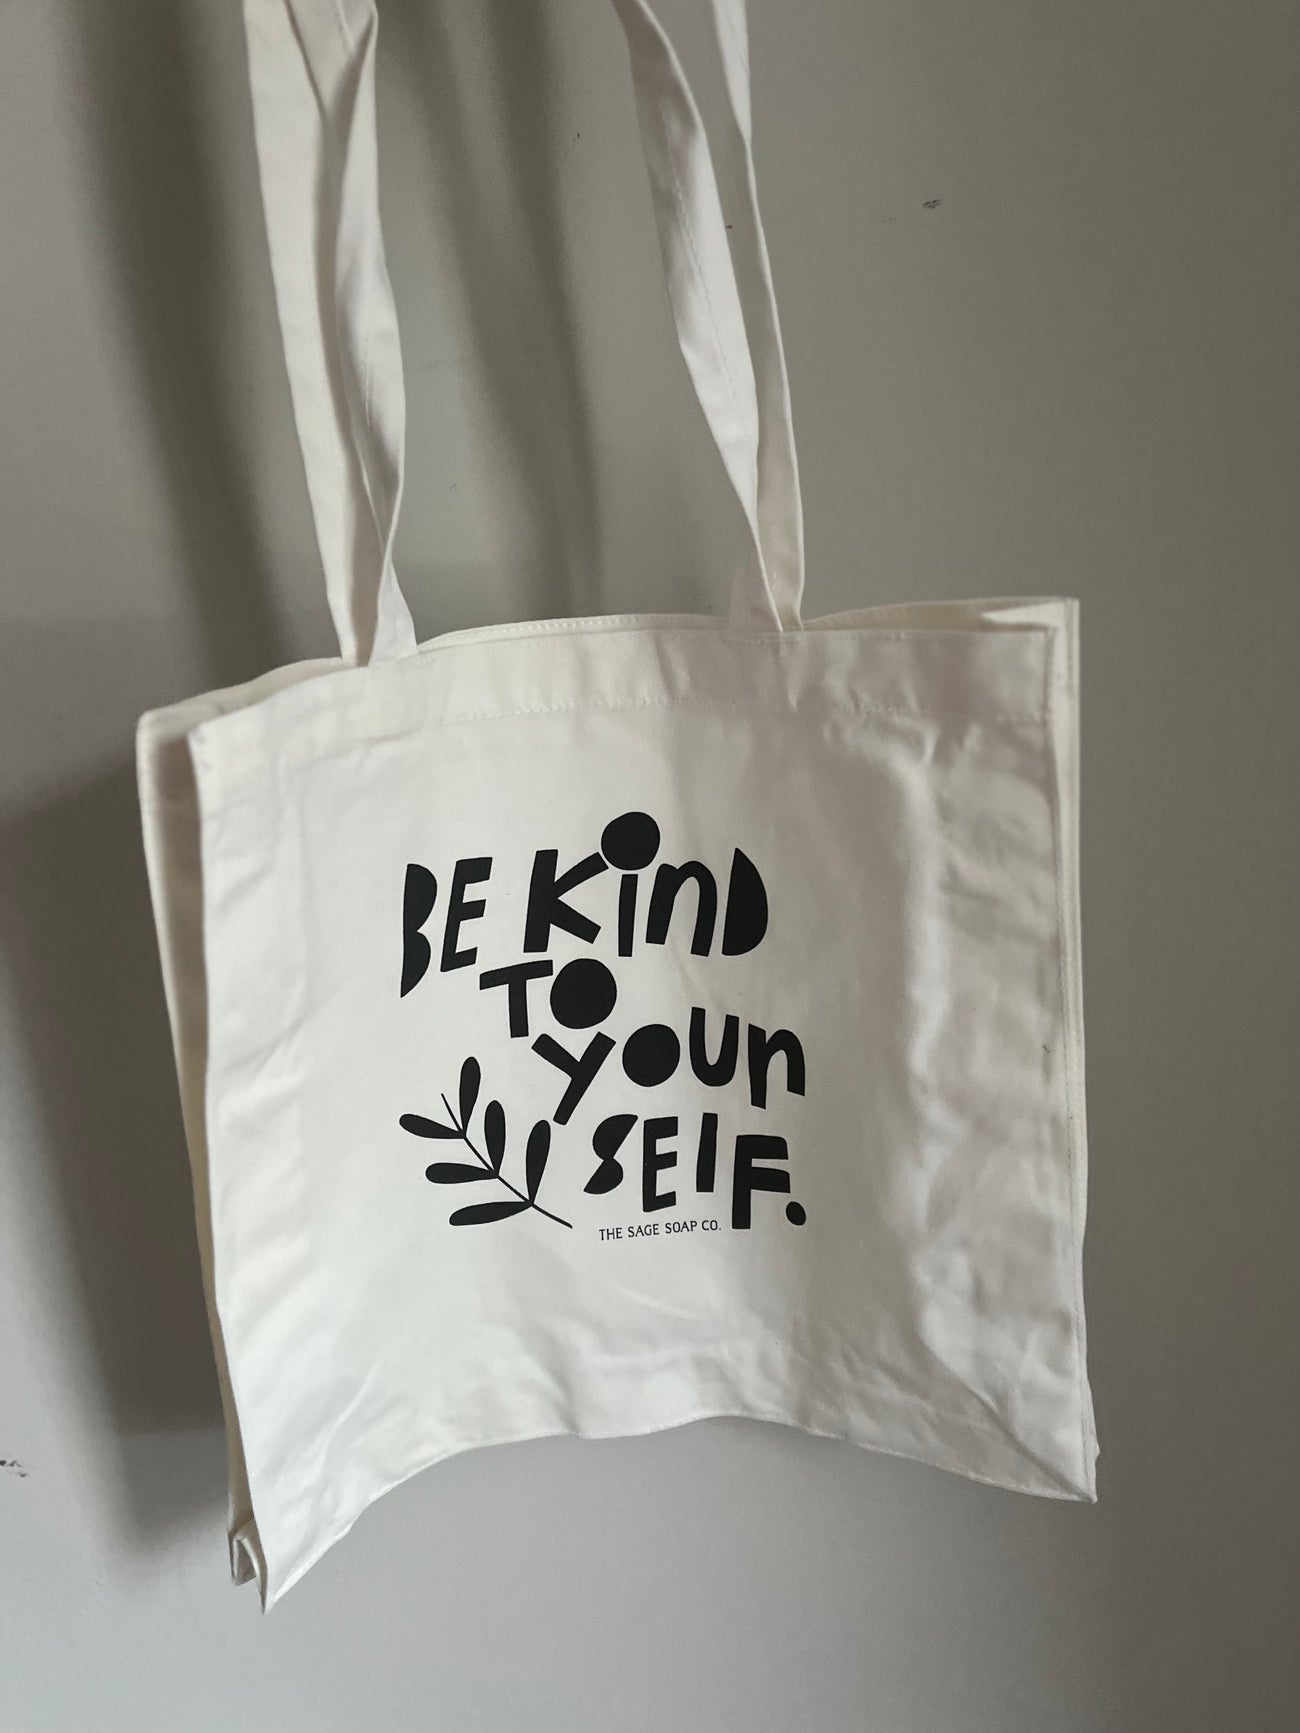 Be Kind To Yourself Cotton Tote Bag